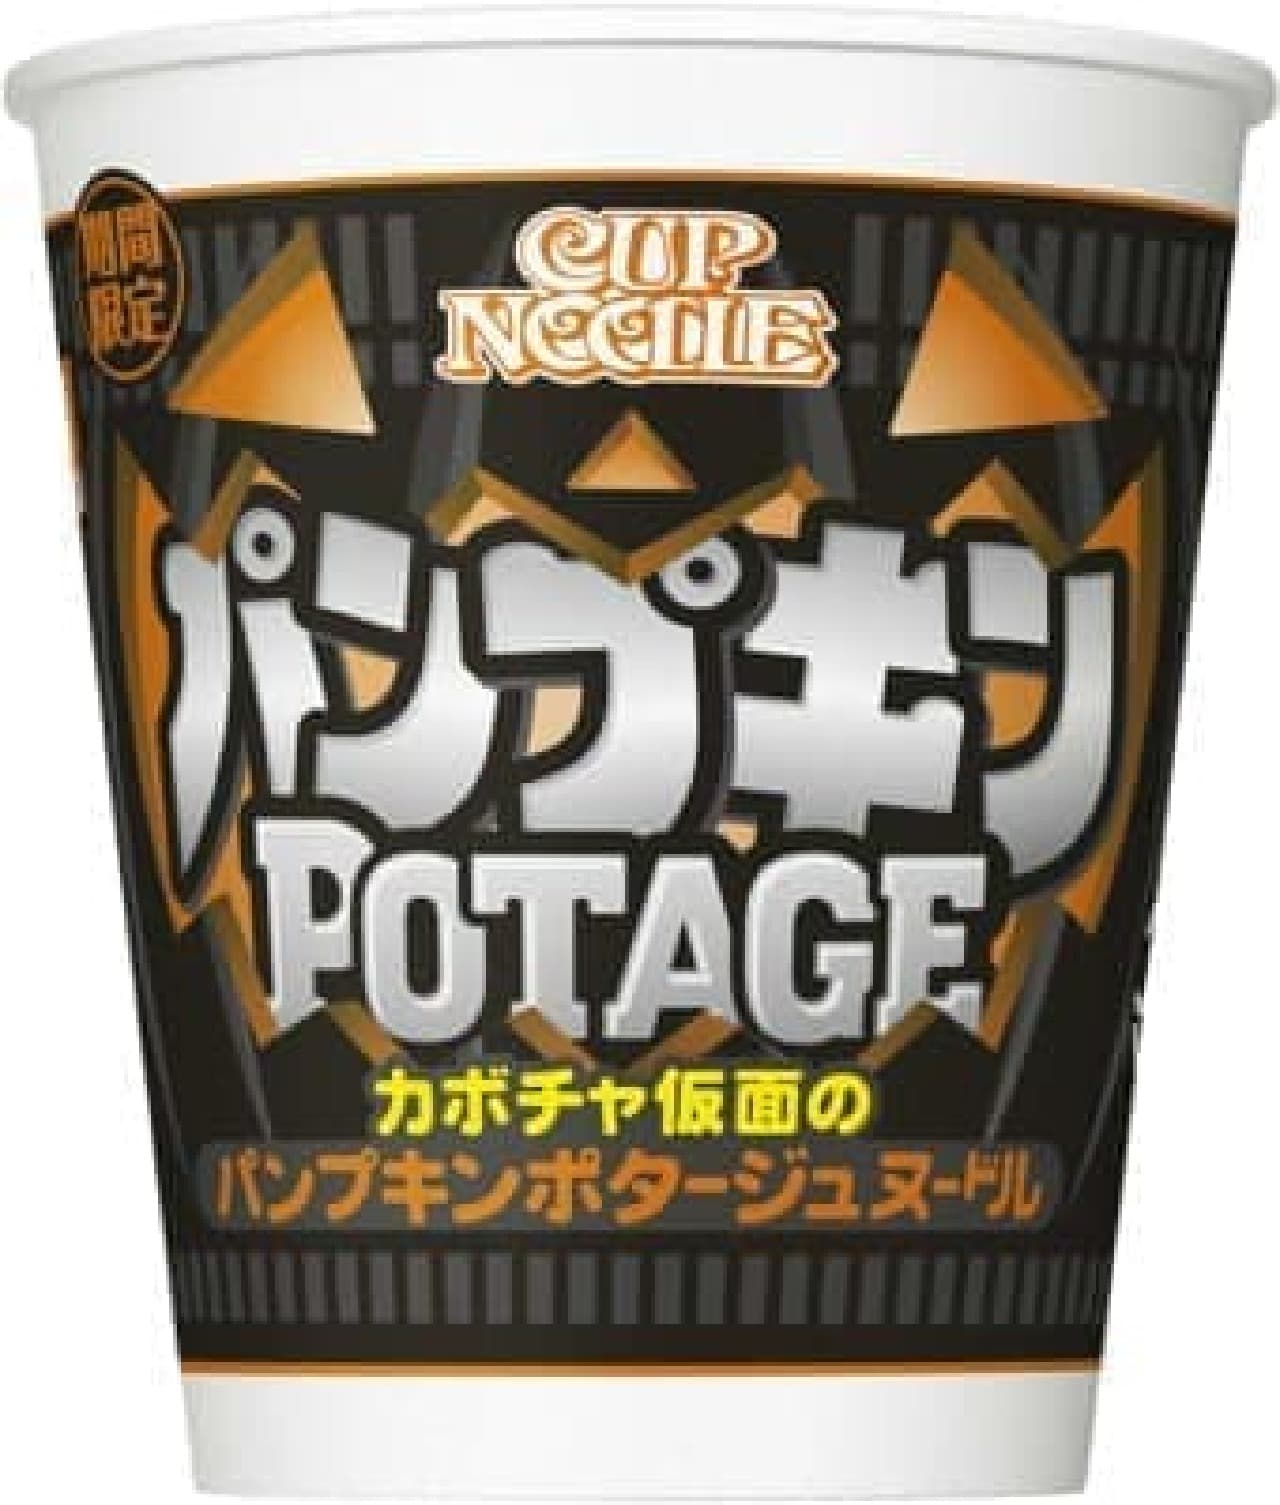 Halloween limited cup noodles!